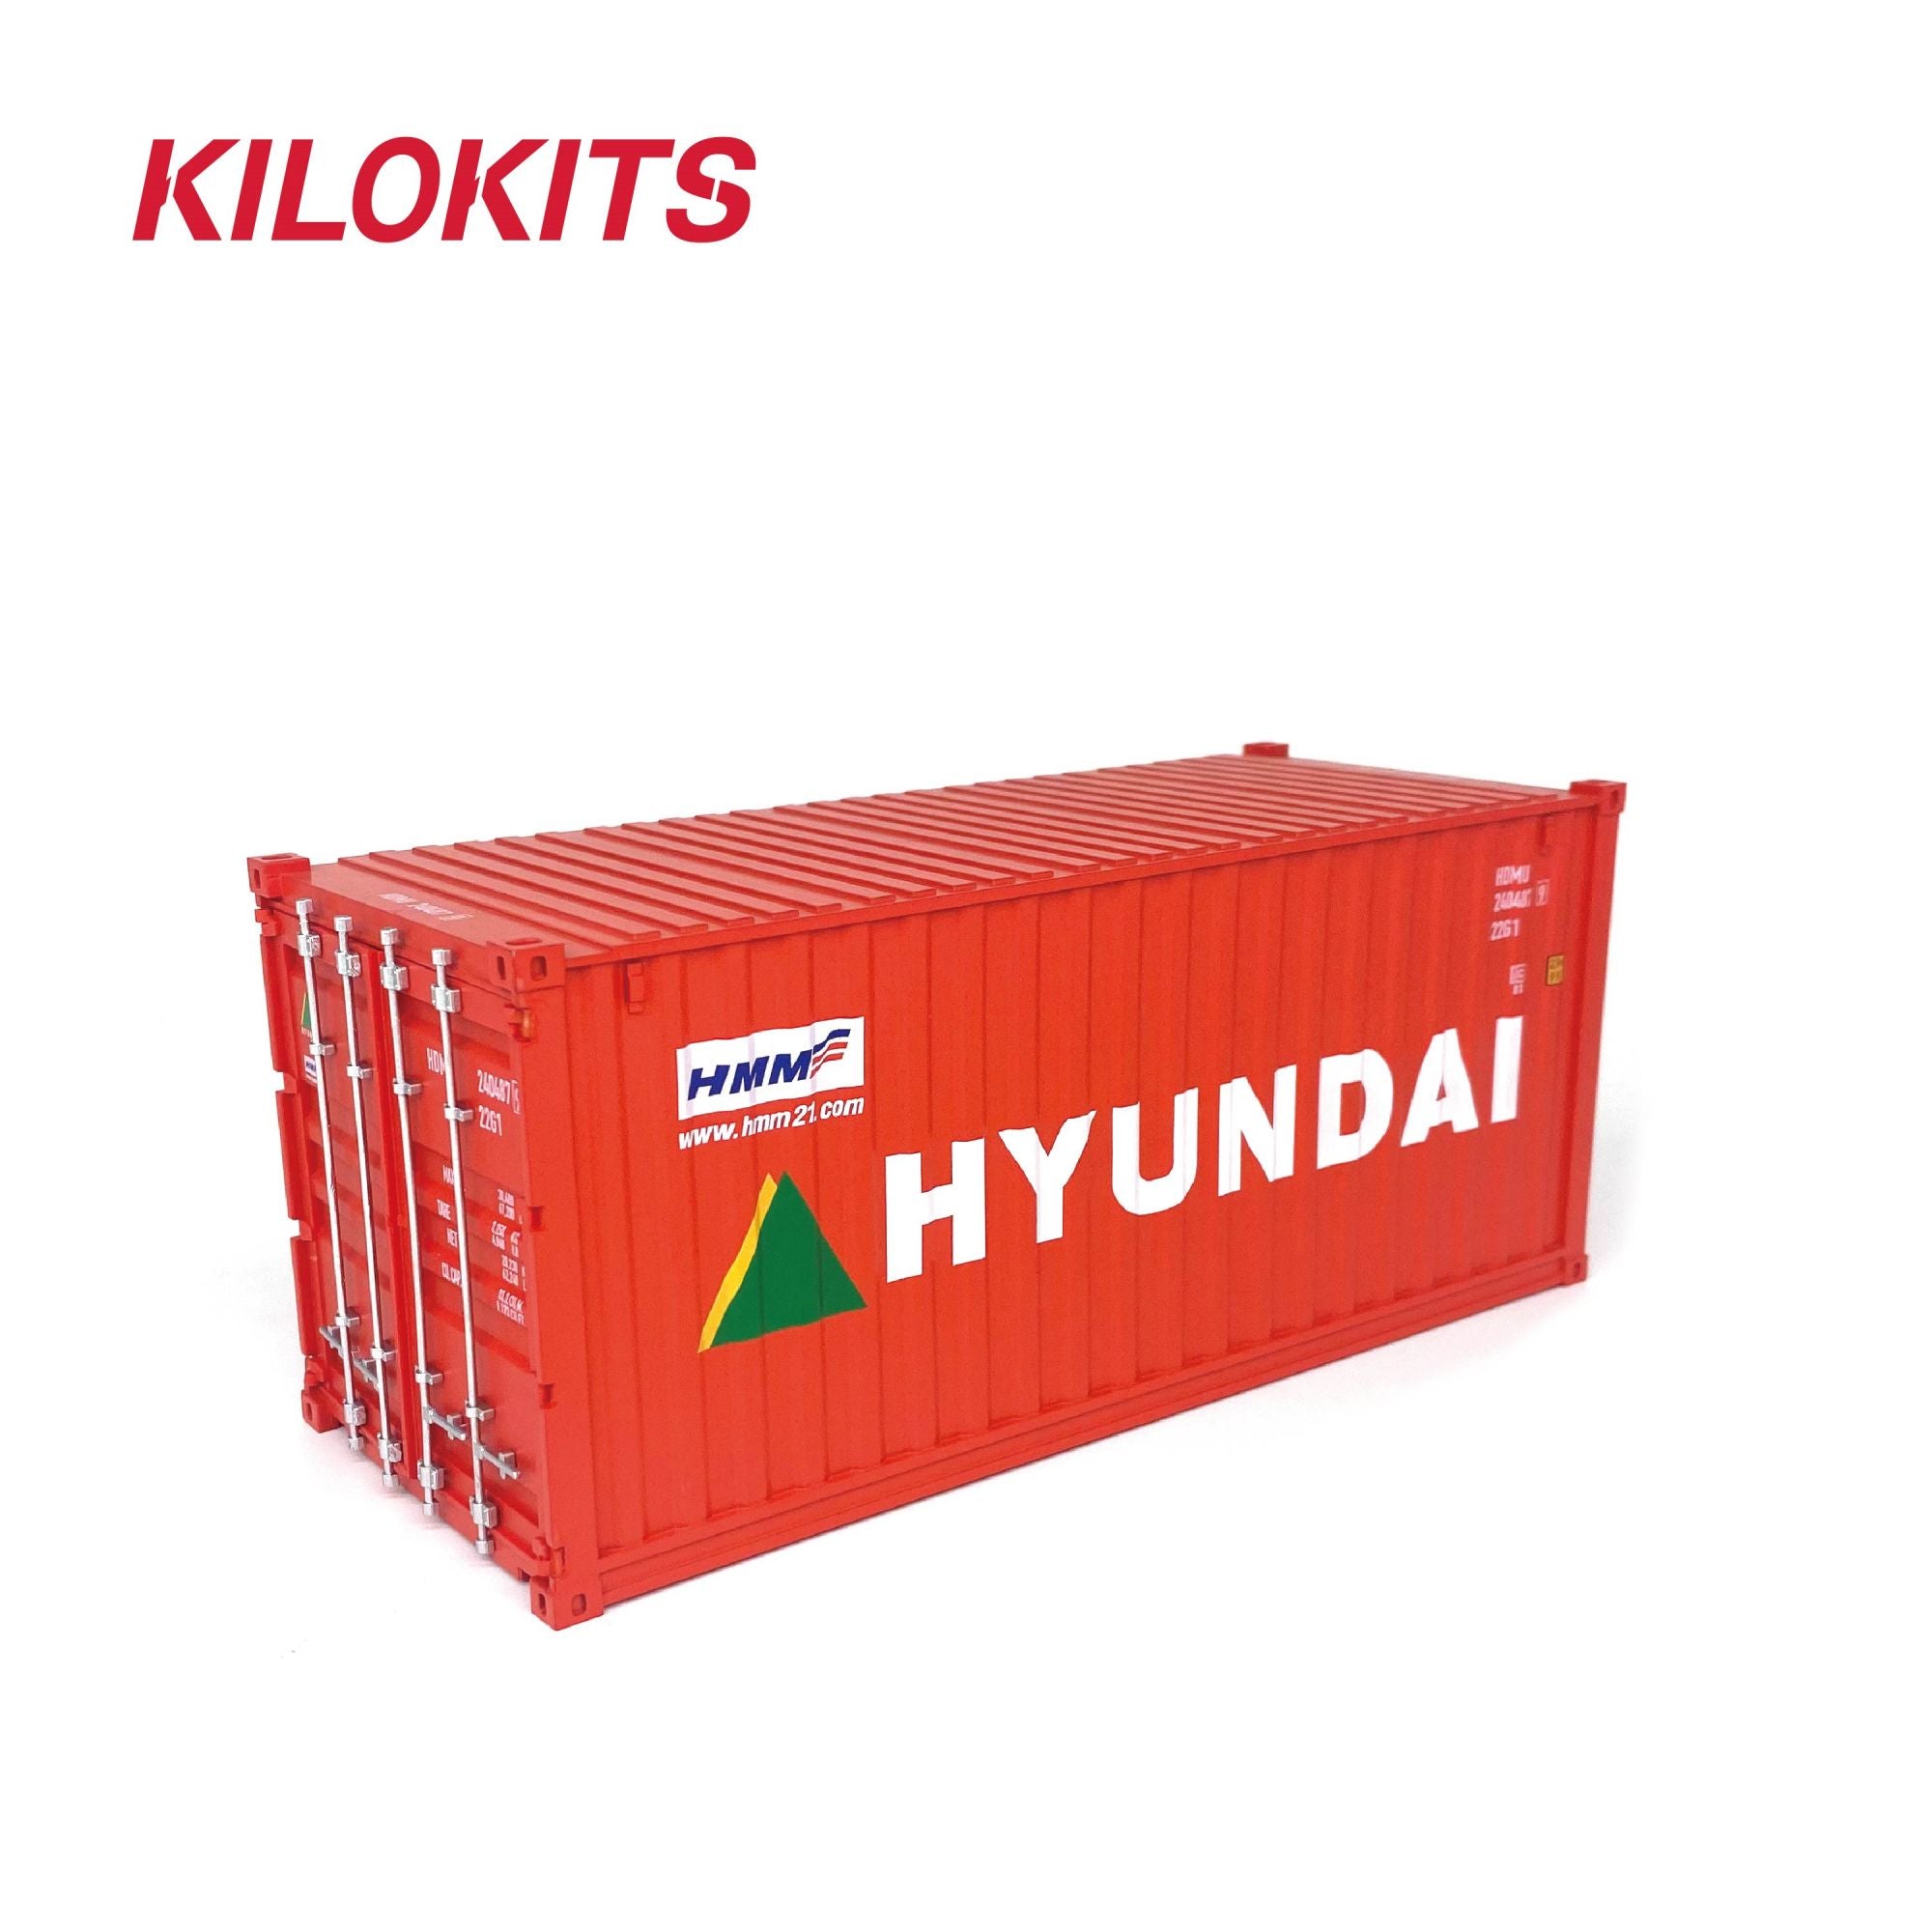 1:35 20ft Container Model Kits Decorated HYUNDAI #5067A